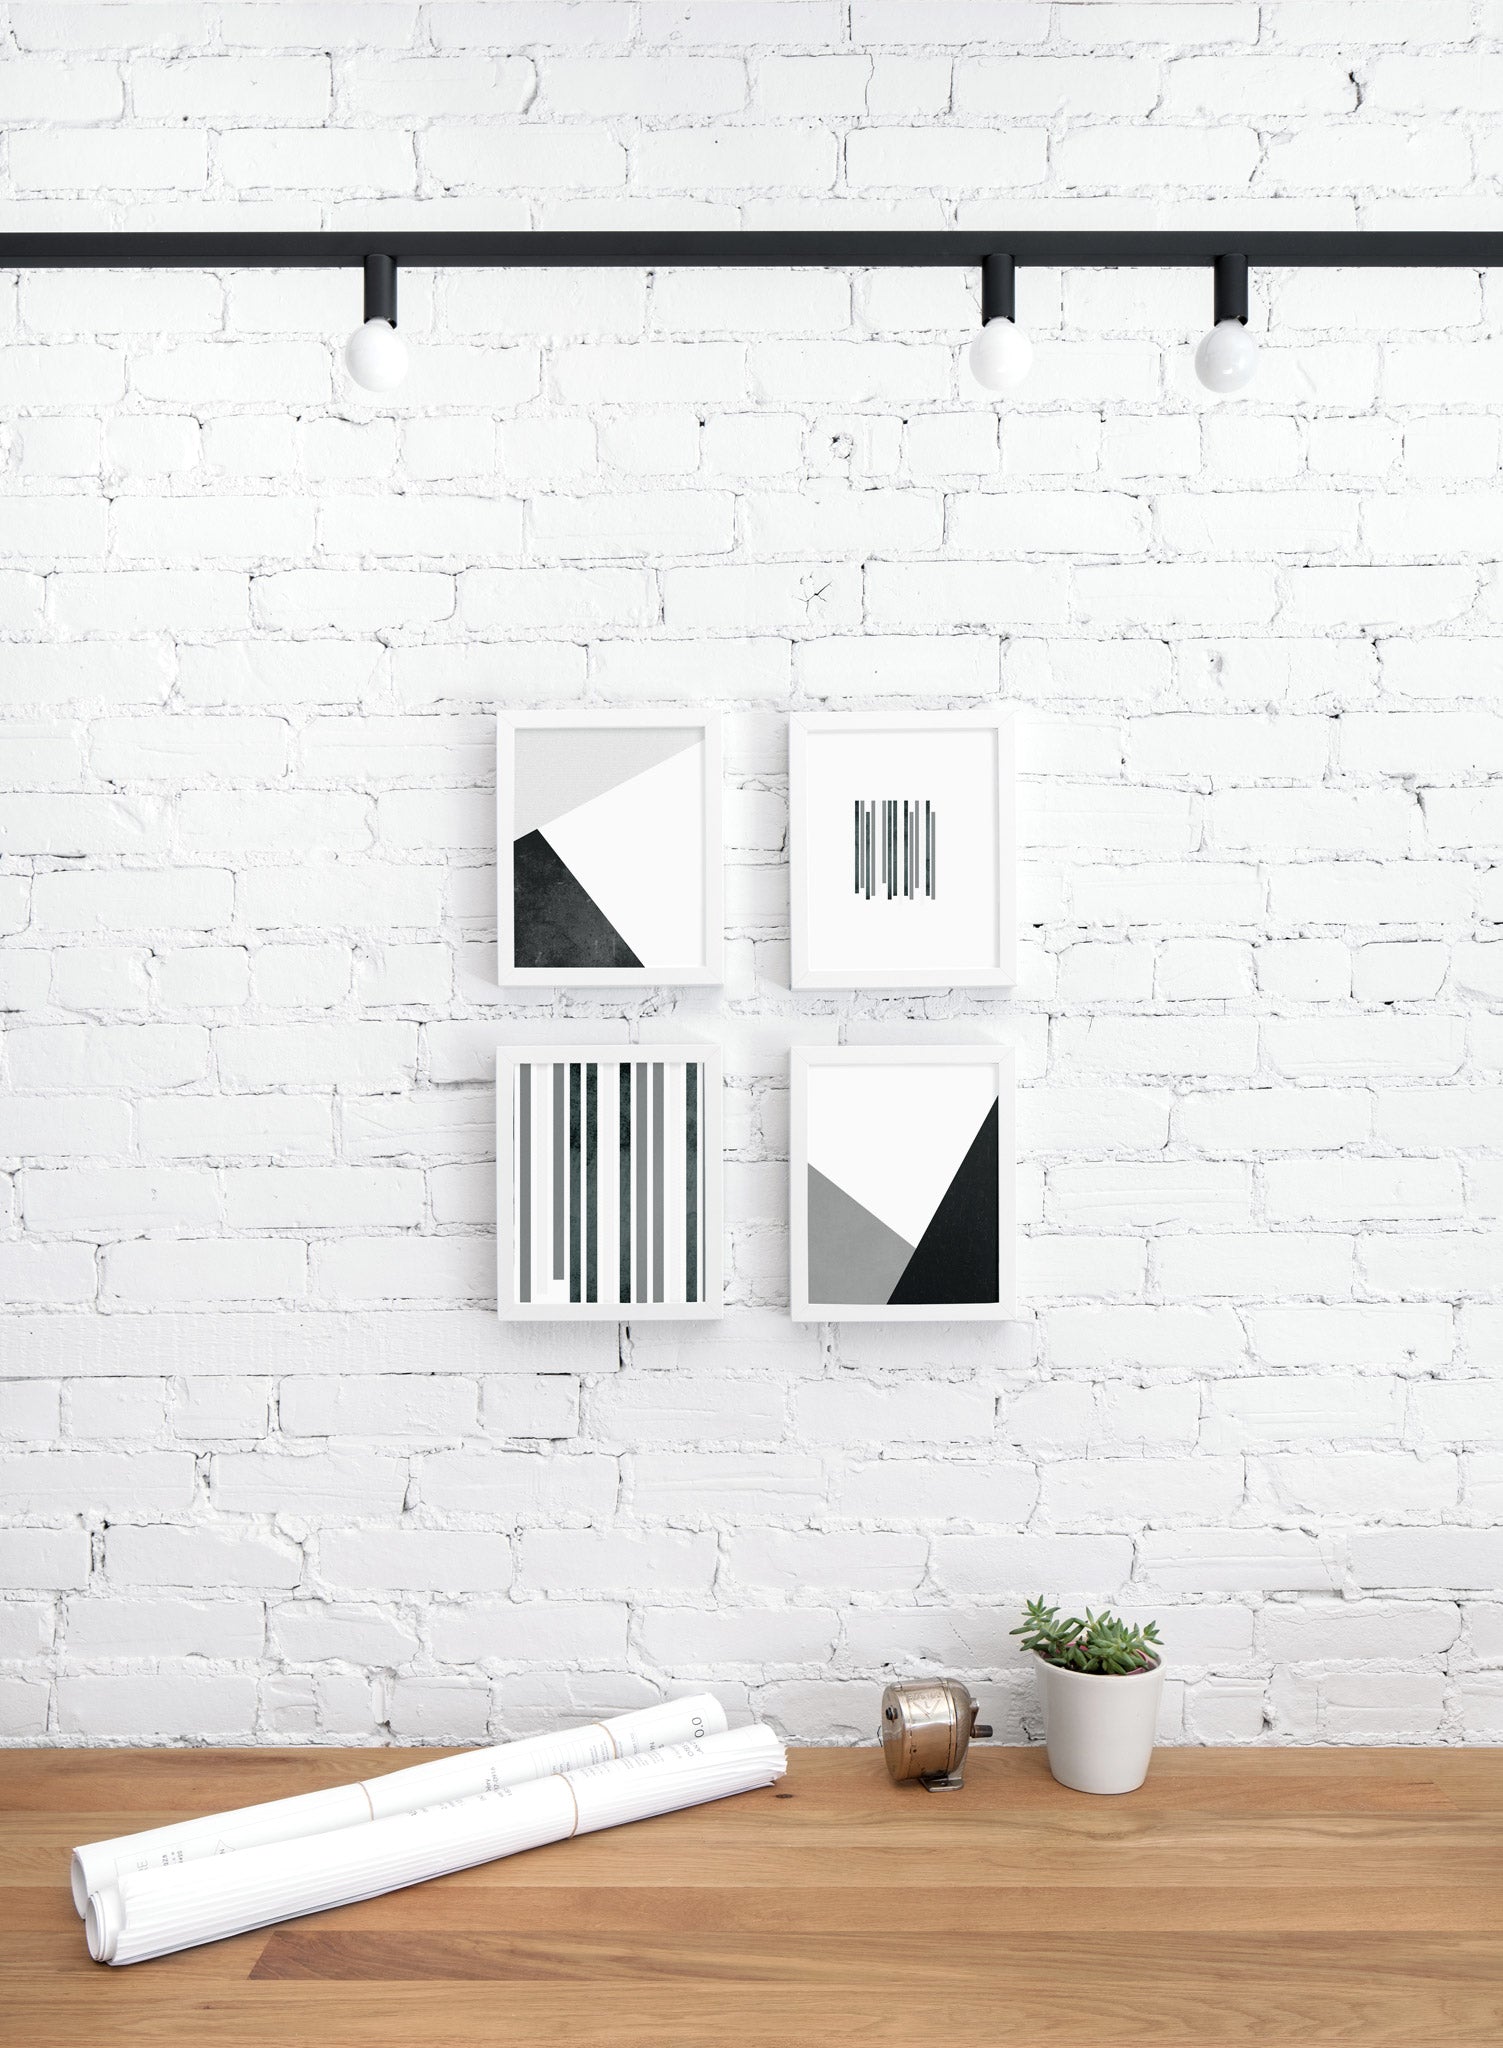 Scandinavian poster by Opposite Wall with abstract graphic Side Angle design - Personal office